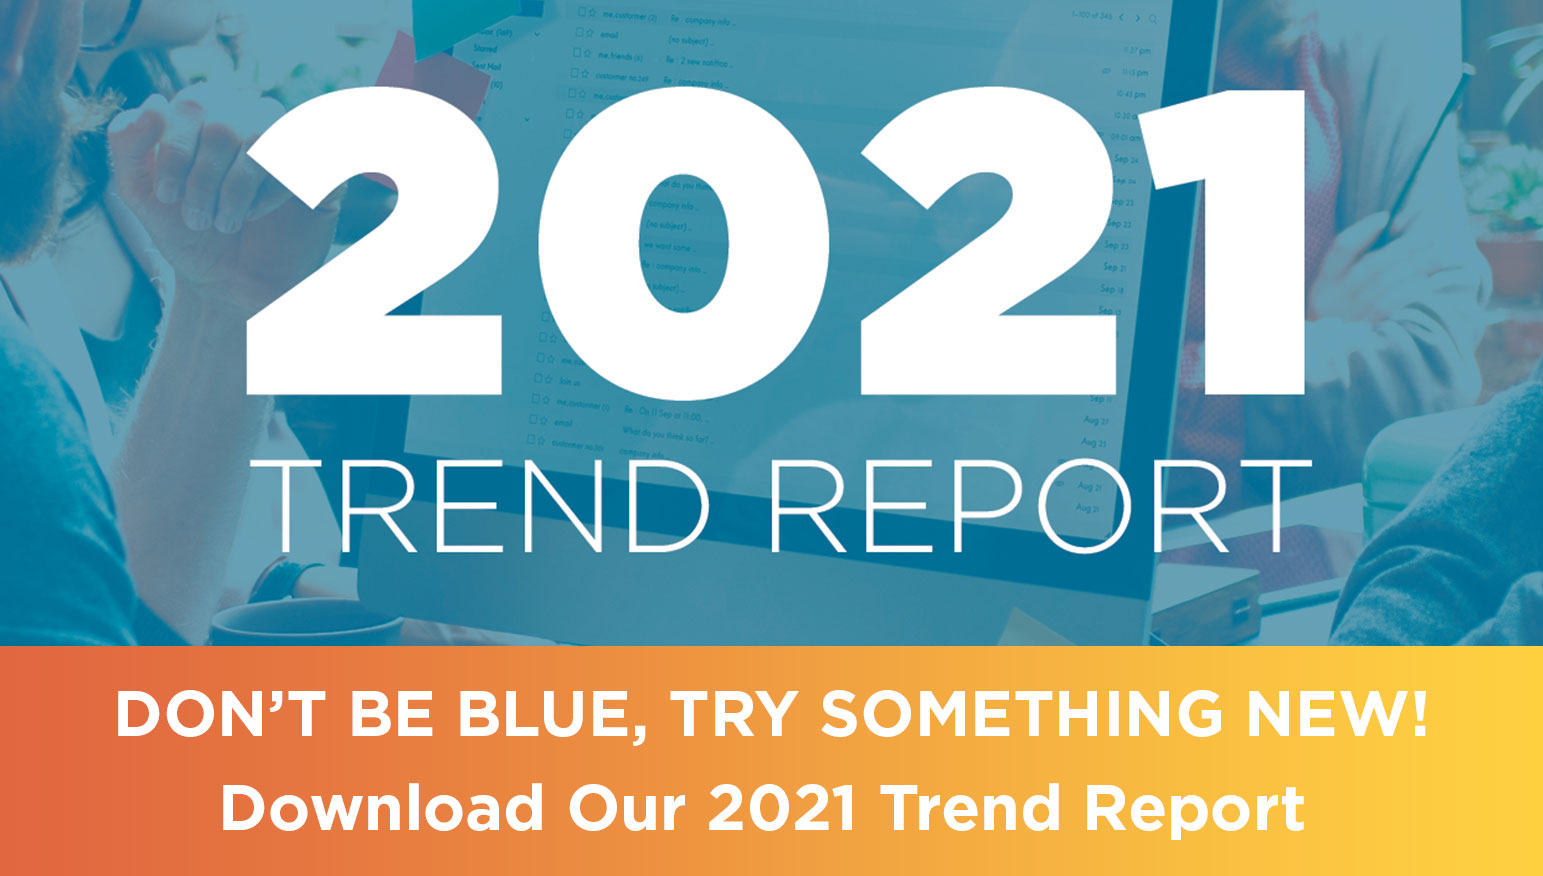 Download our GC trends report. Don't be blue, try something new with these 2021 trends